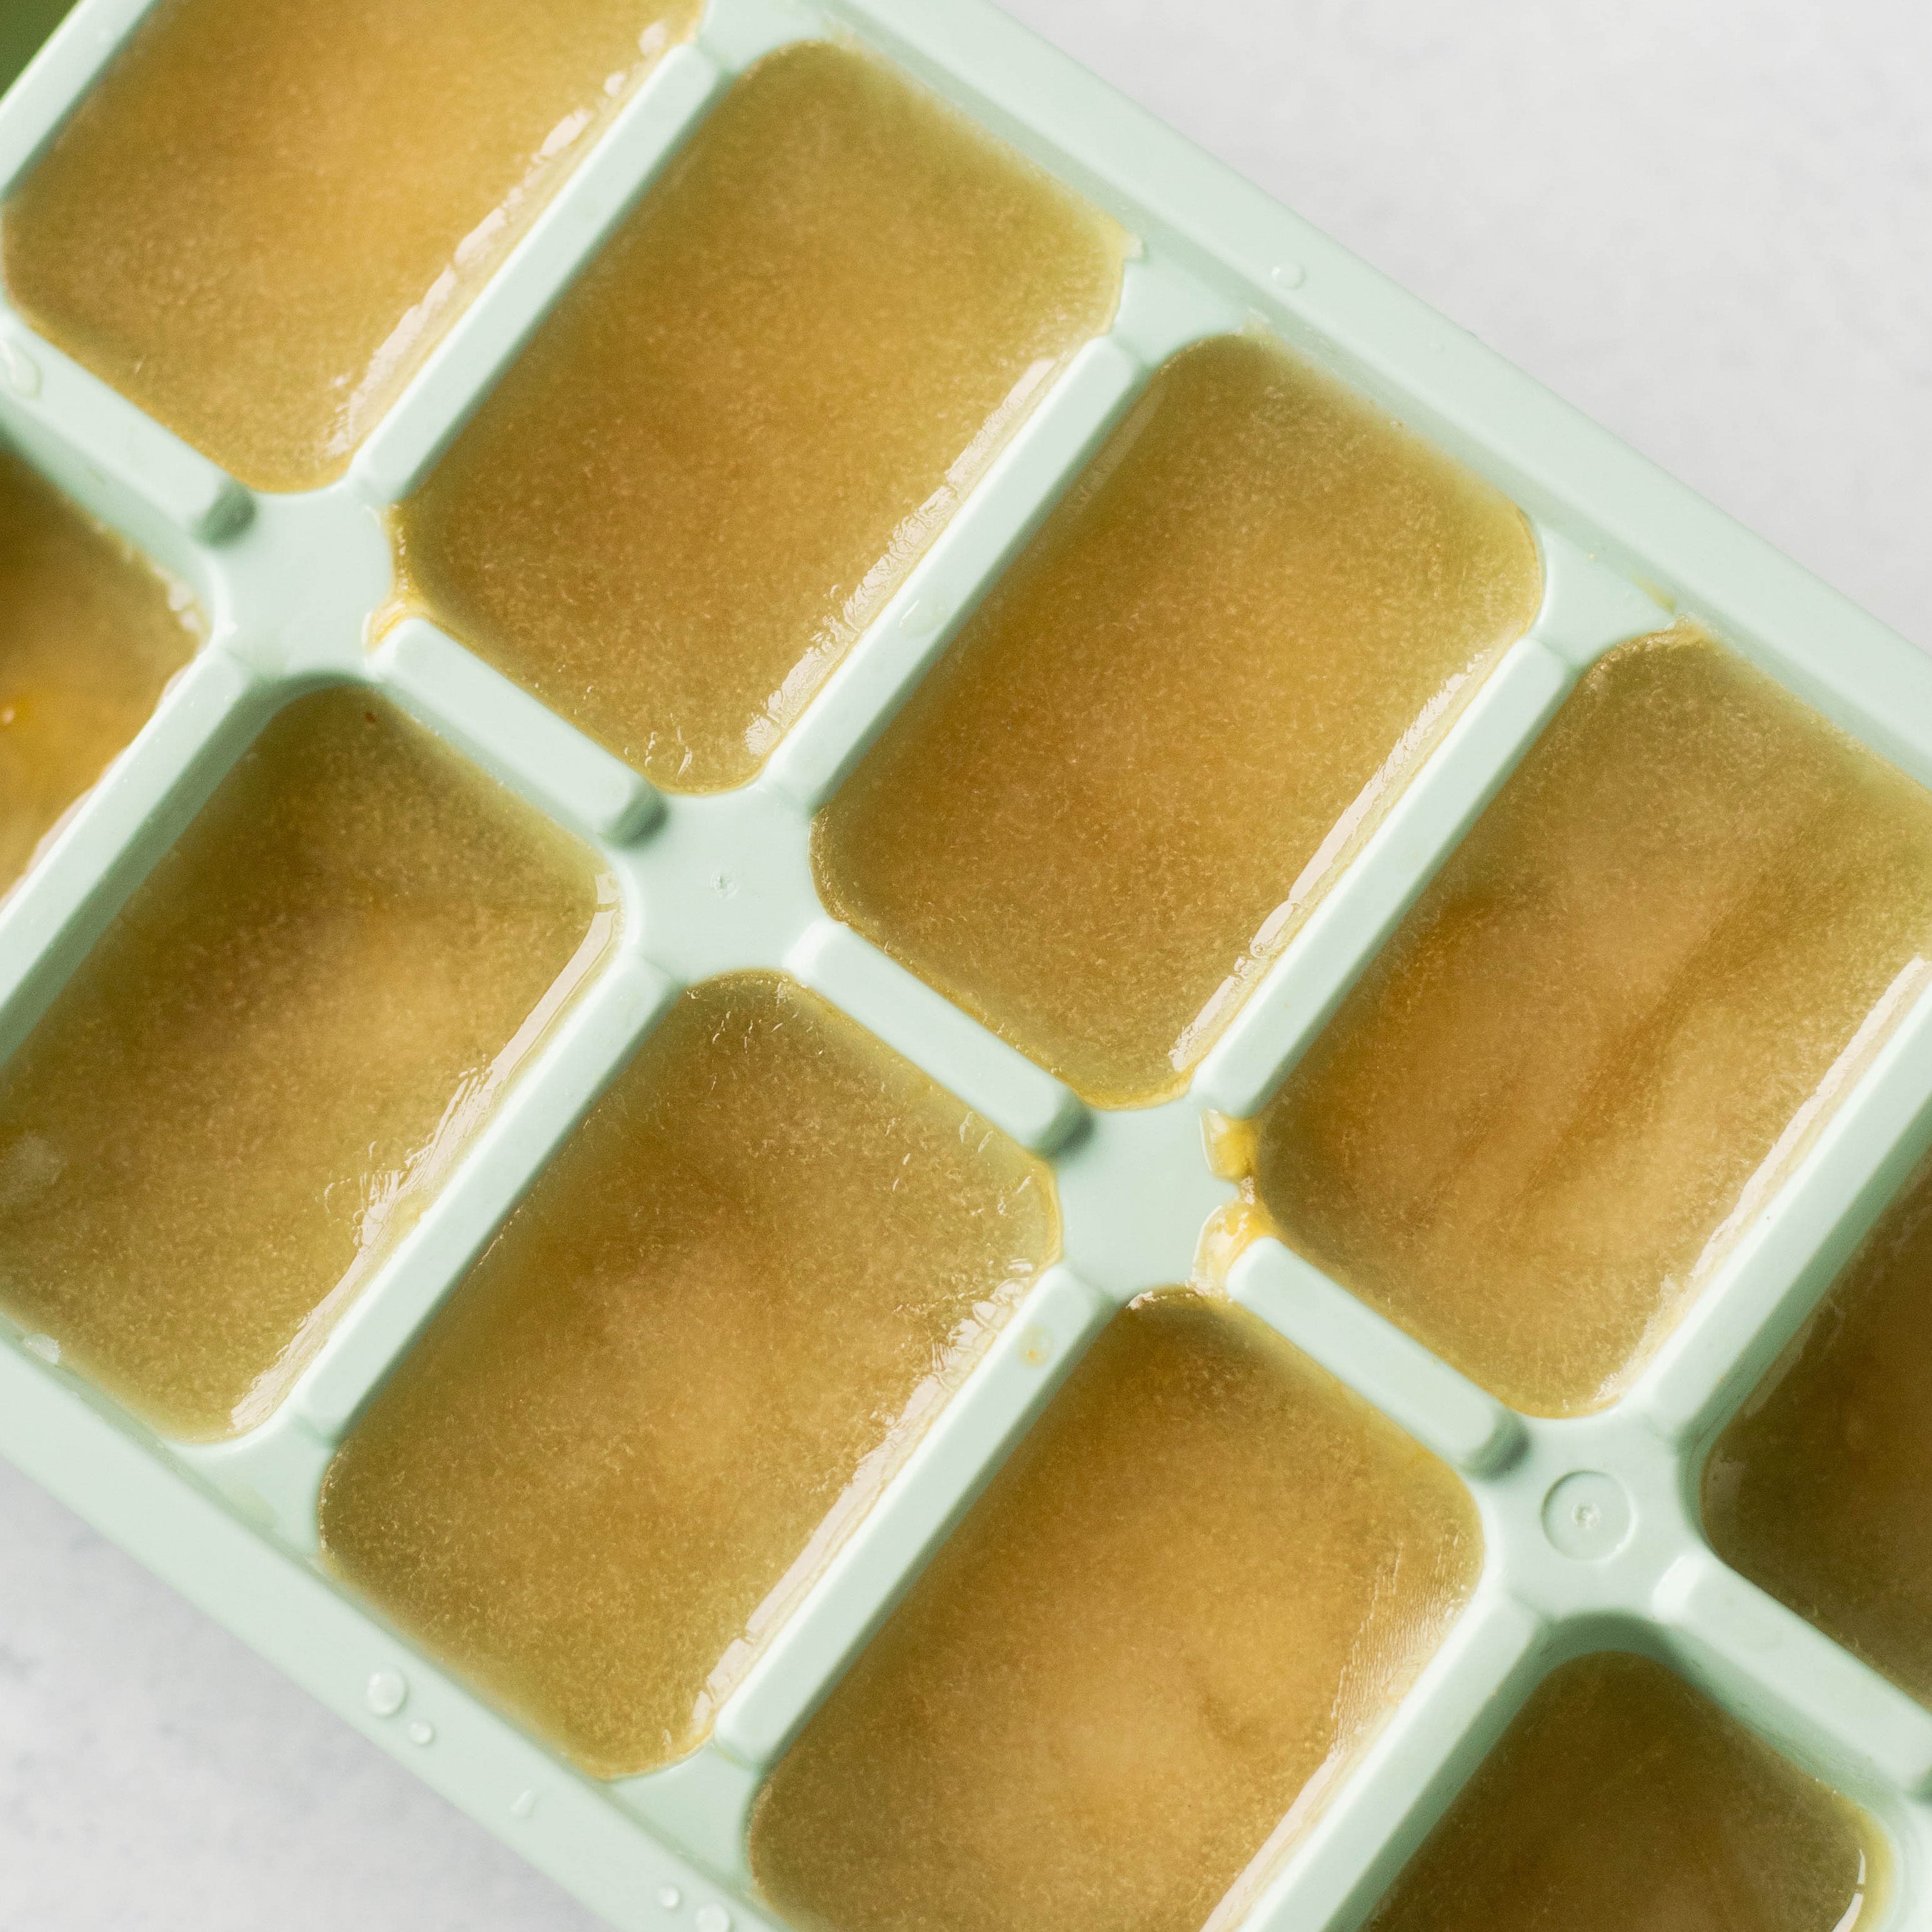 Colorfuel Hydration Ice Cubes